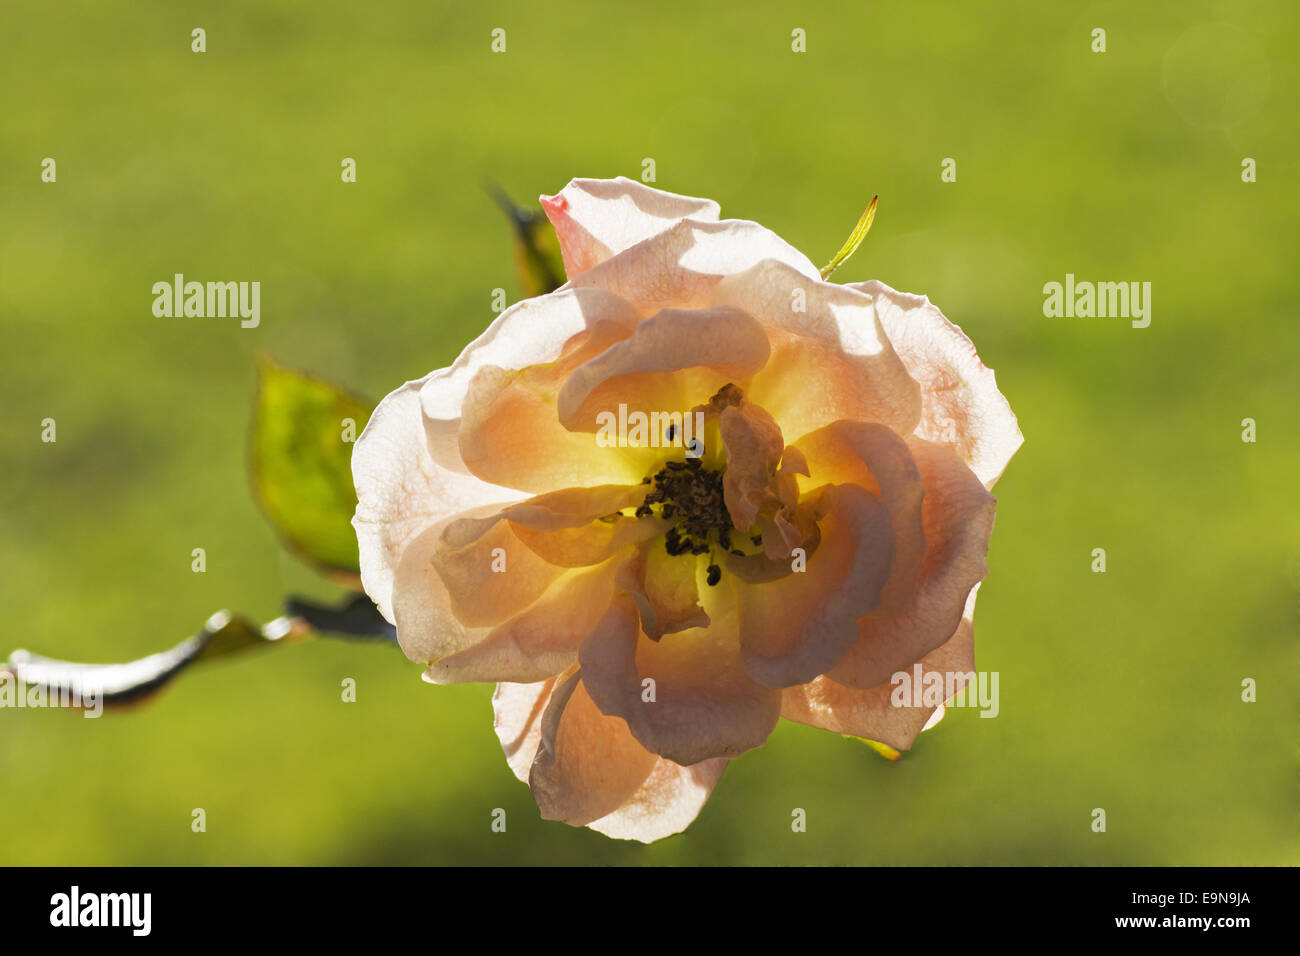 Blooming gardenrose in january - caducity Stock Photo